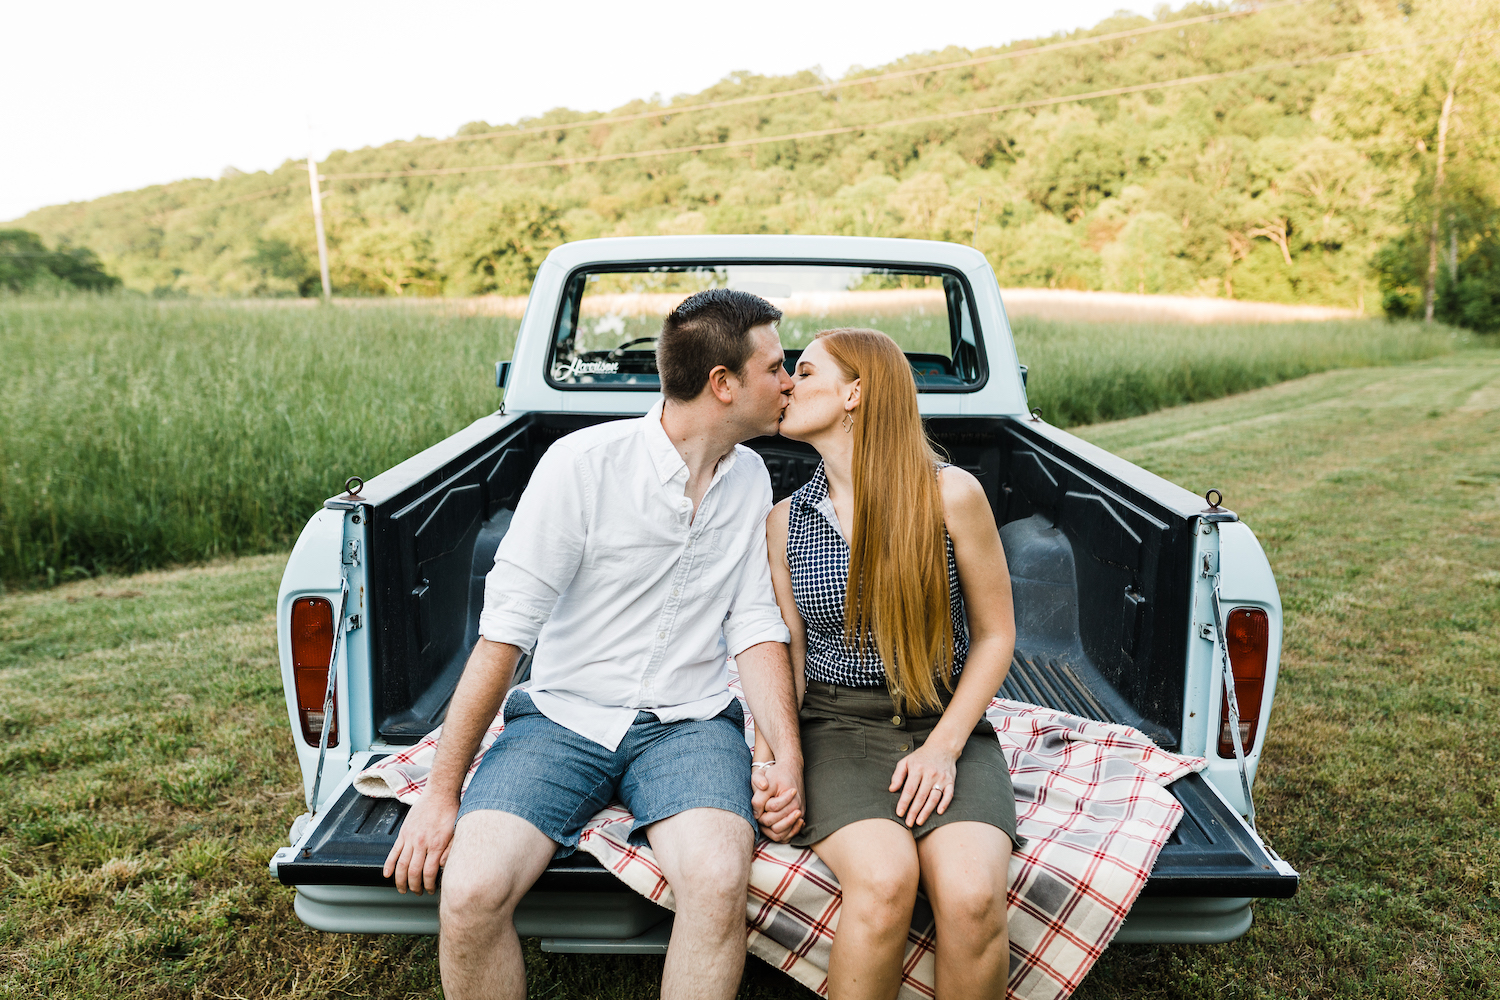 man and woman hold hands and kiss while sitting on bed of Ford truck in field of grass near Chattanooga